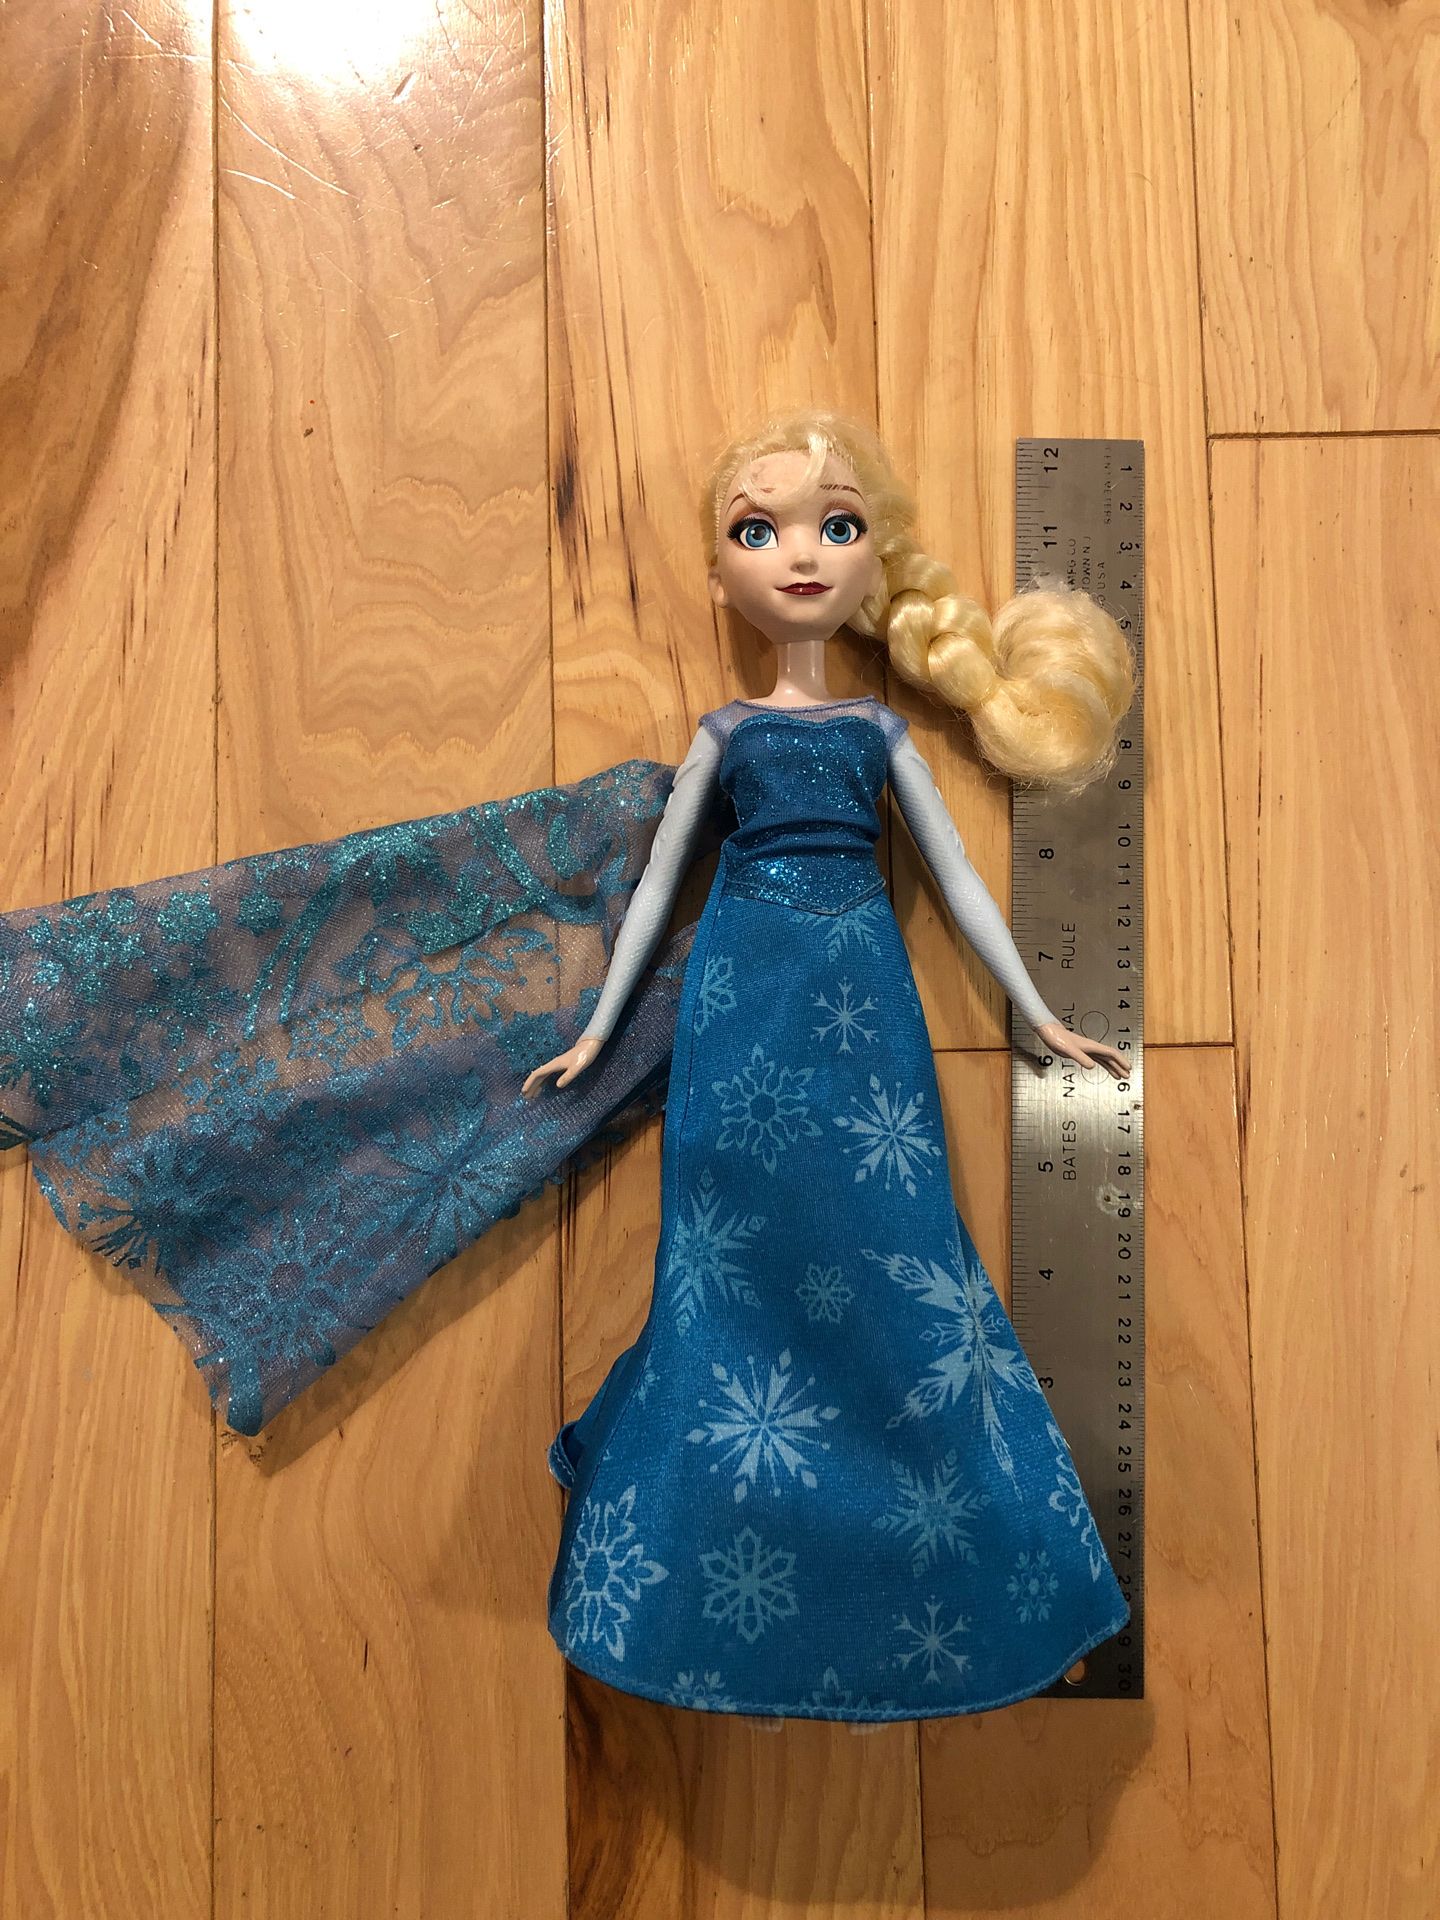 LIKE NEW 12” Light-up Musical Frozen Elsa Doll - Flashing snowflakes, sings, but the most important part is the on/off switch. (You’re welcome.)